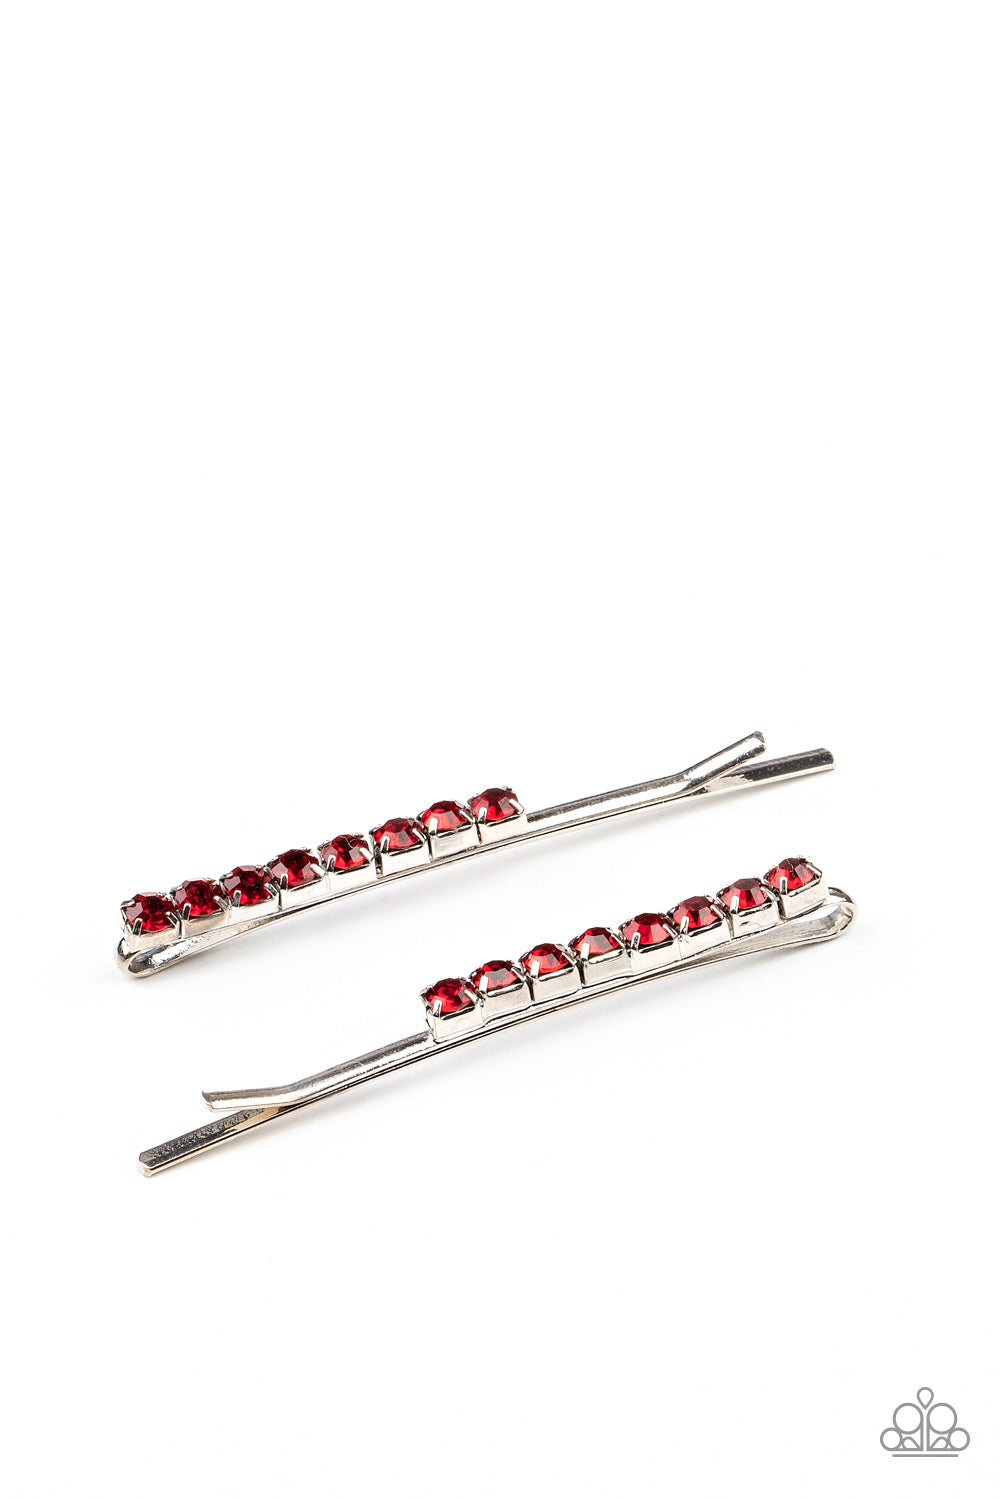 Satisfactory Sparkle - Red hair Clips